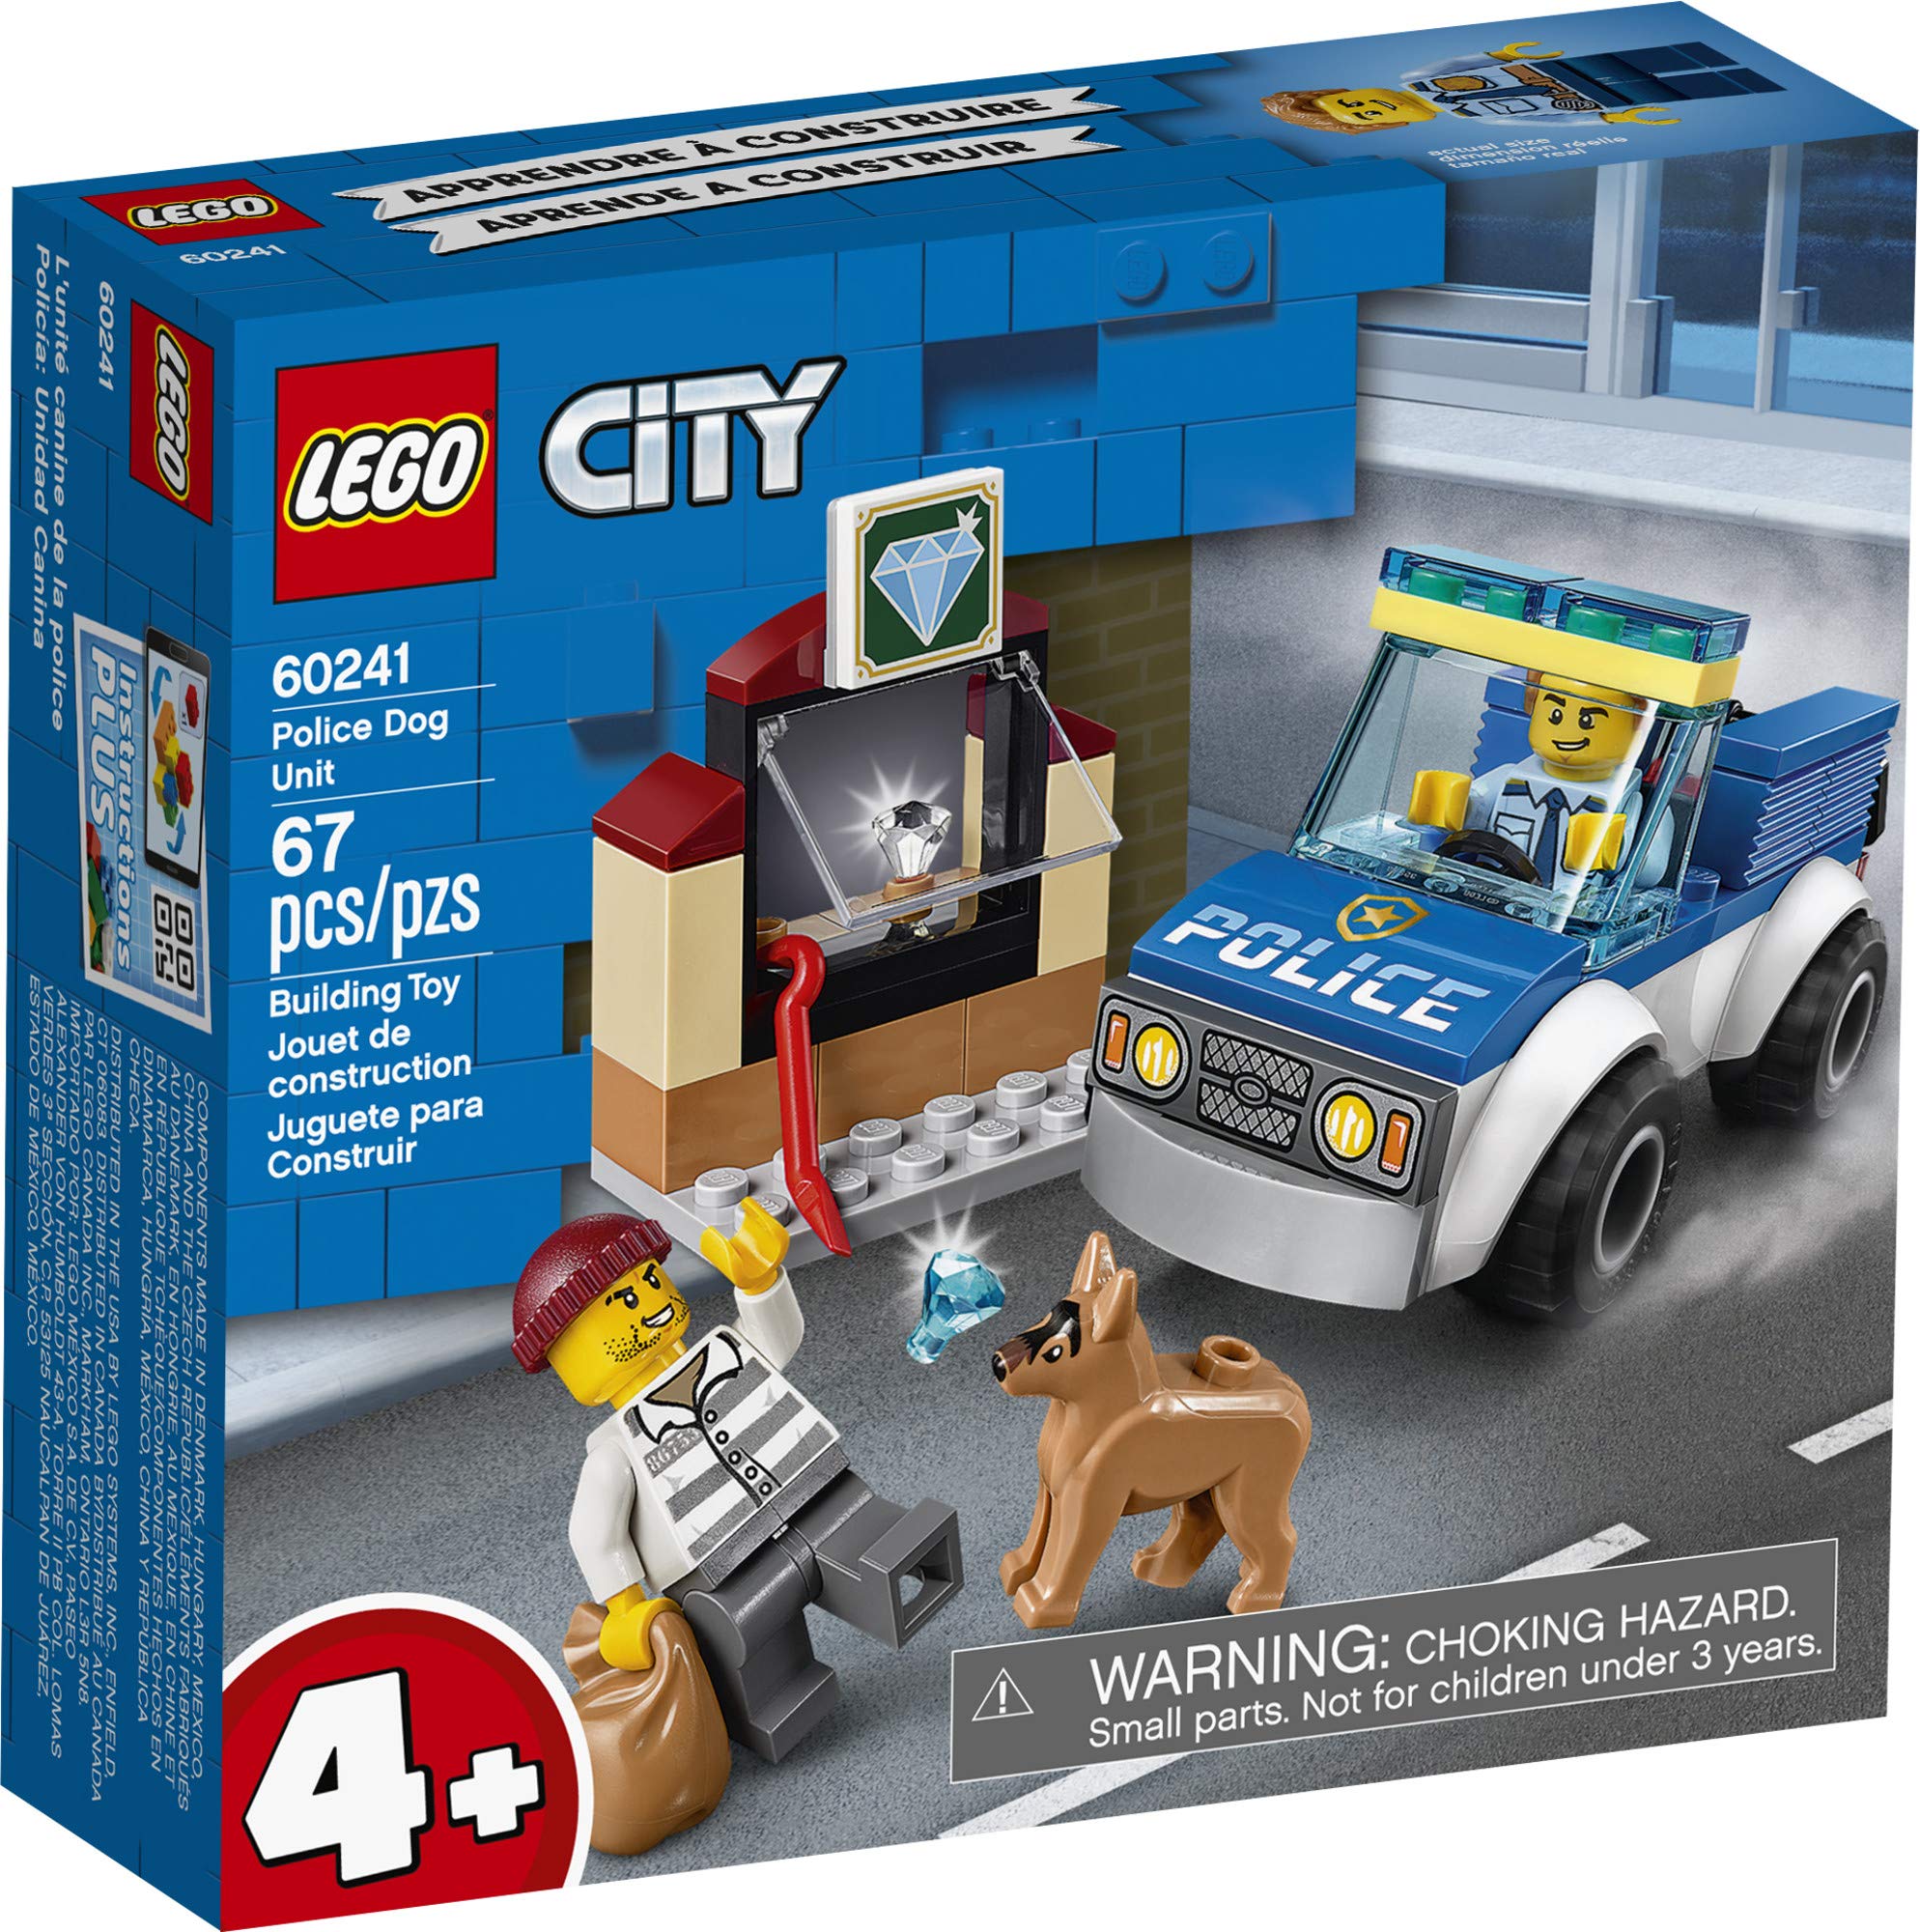 LEGO City Police Dog Unit 60241 Police Toy, Cool Building Set for Kids (67 Pieces)